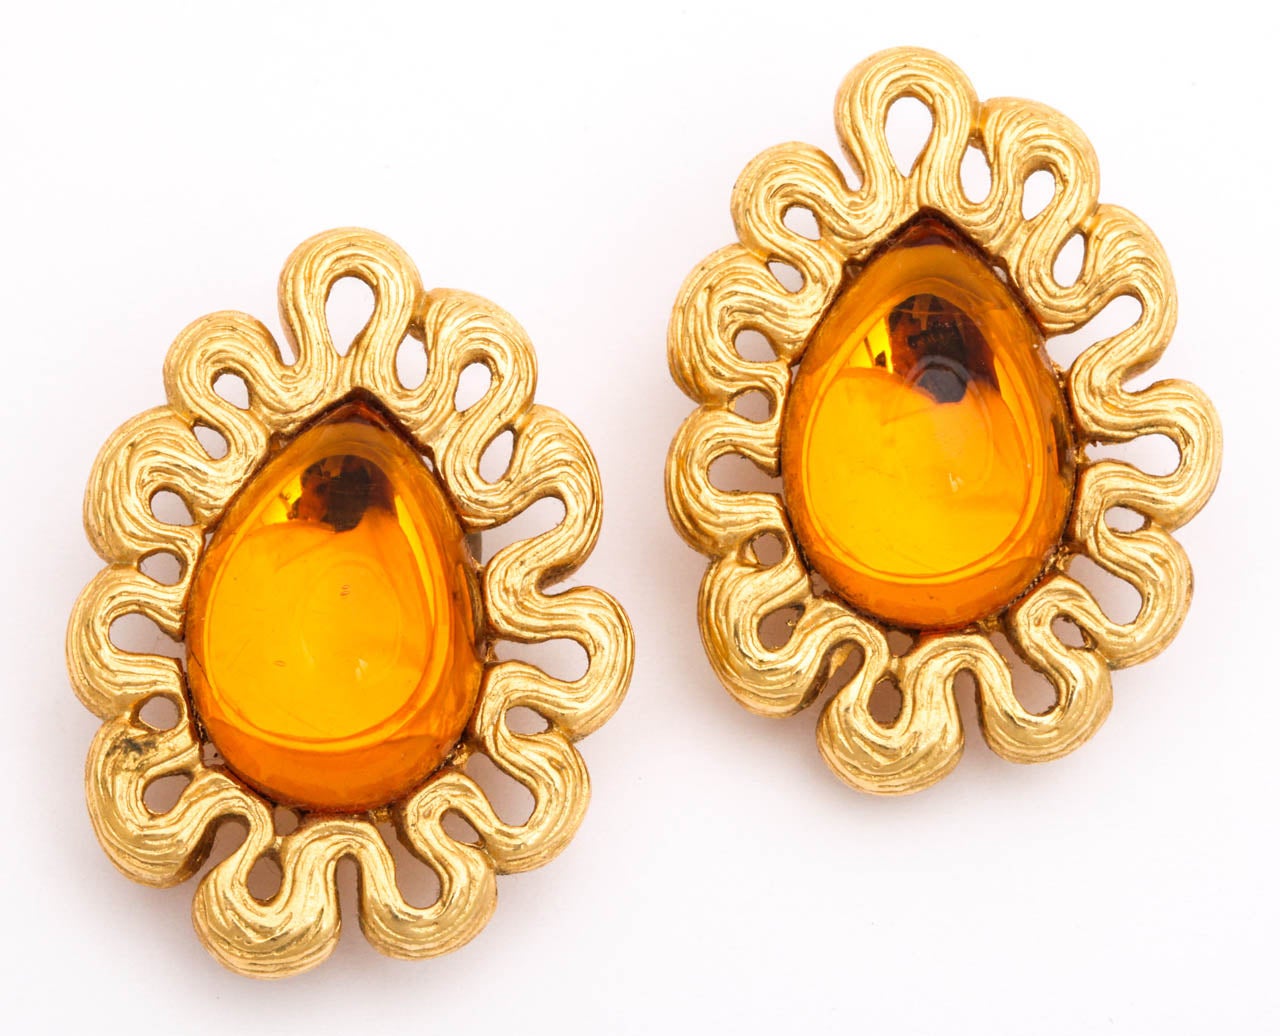 Large pear shaped amber colored stone with undulating gold tone frame. Marked Givenchy, Paris, New York, and logo.